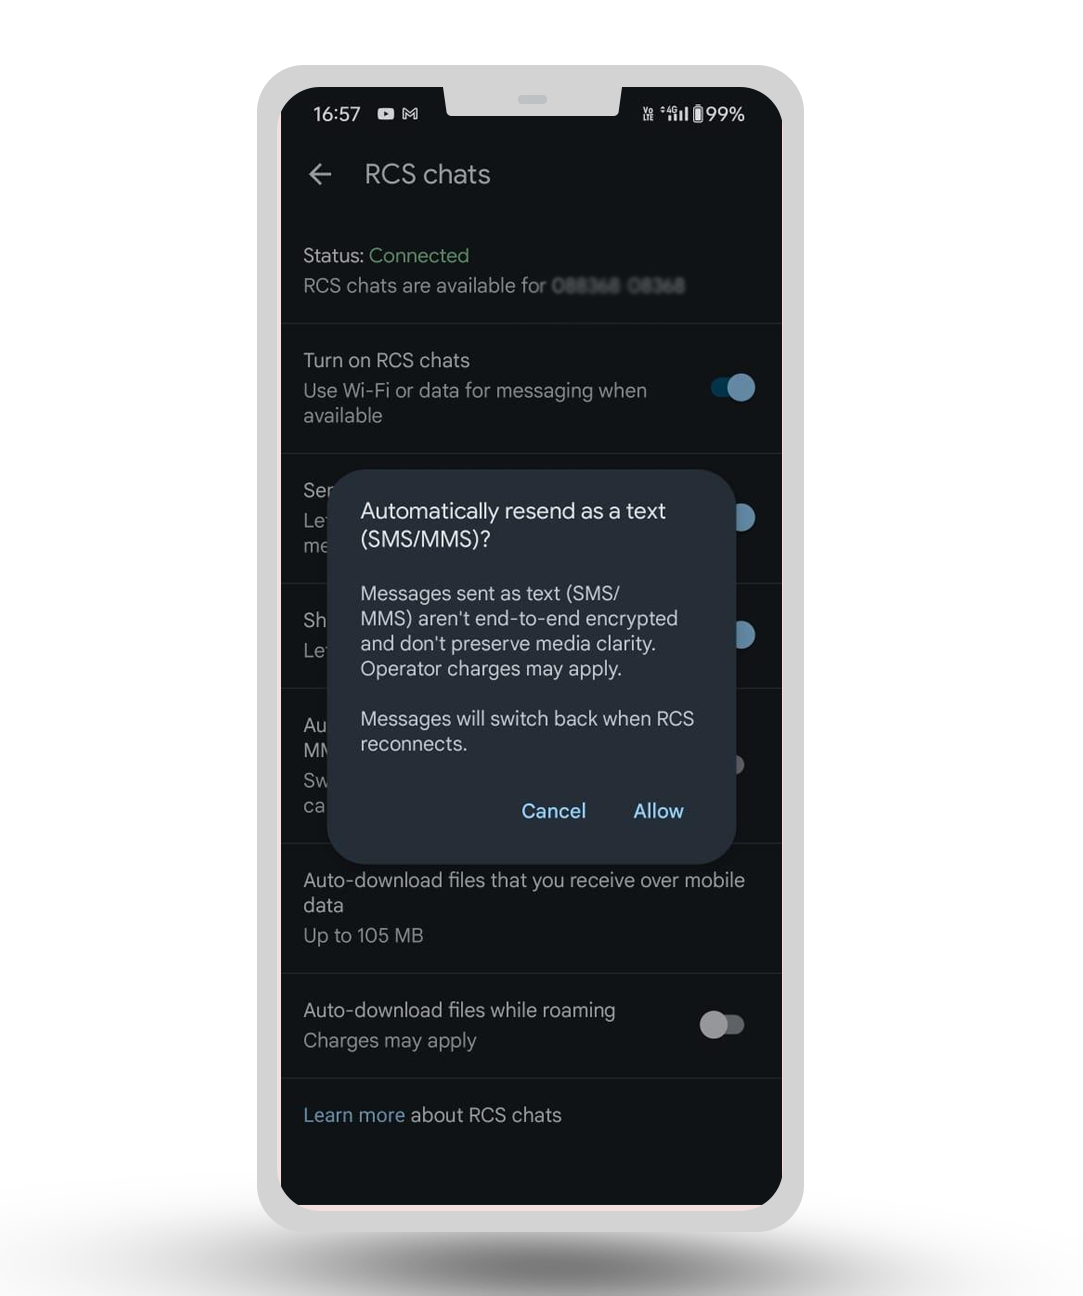 RCS chat settings for Androd users